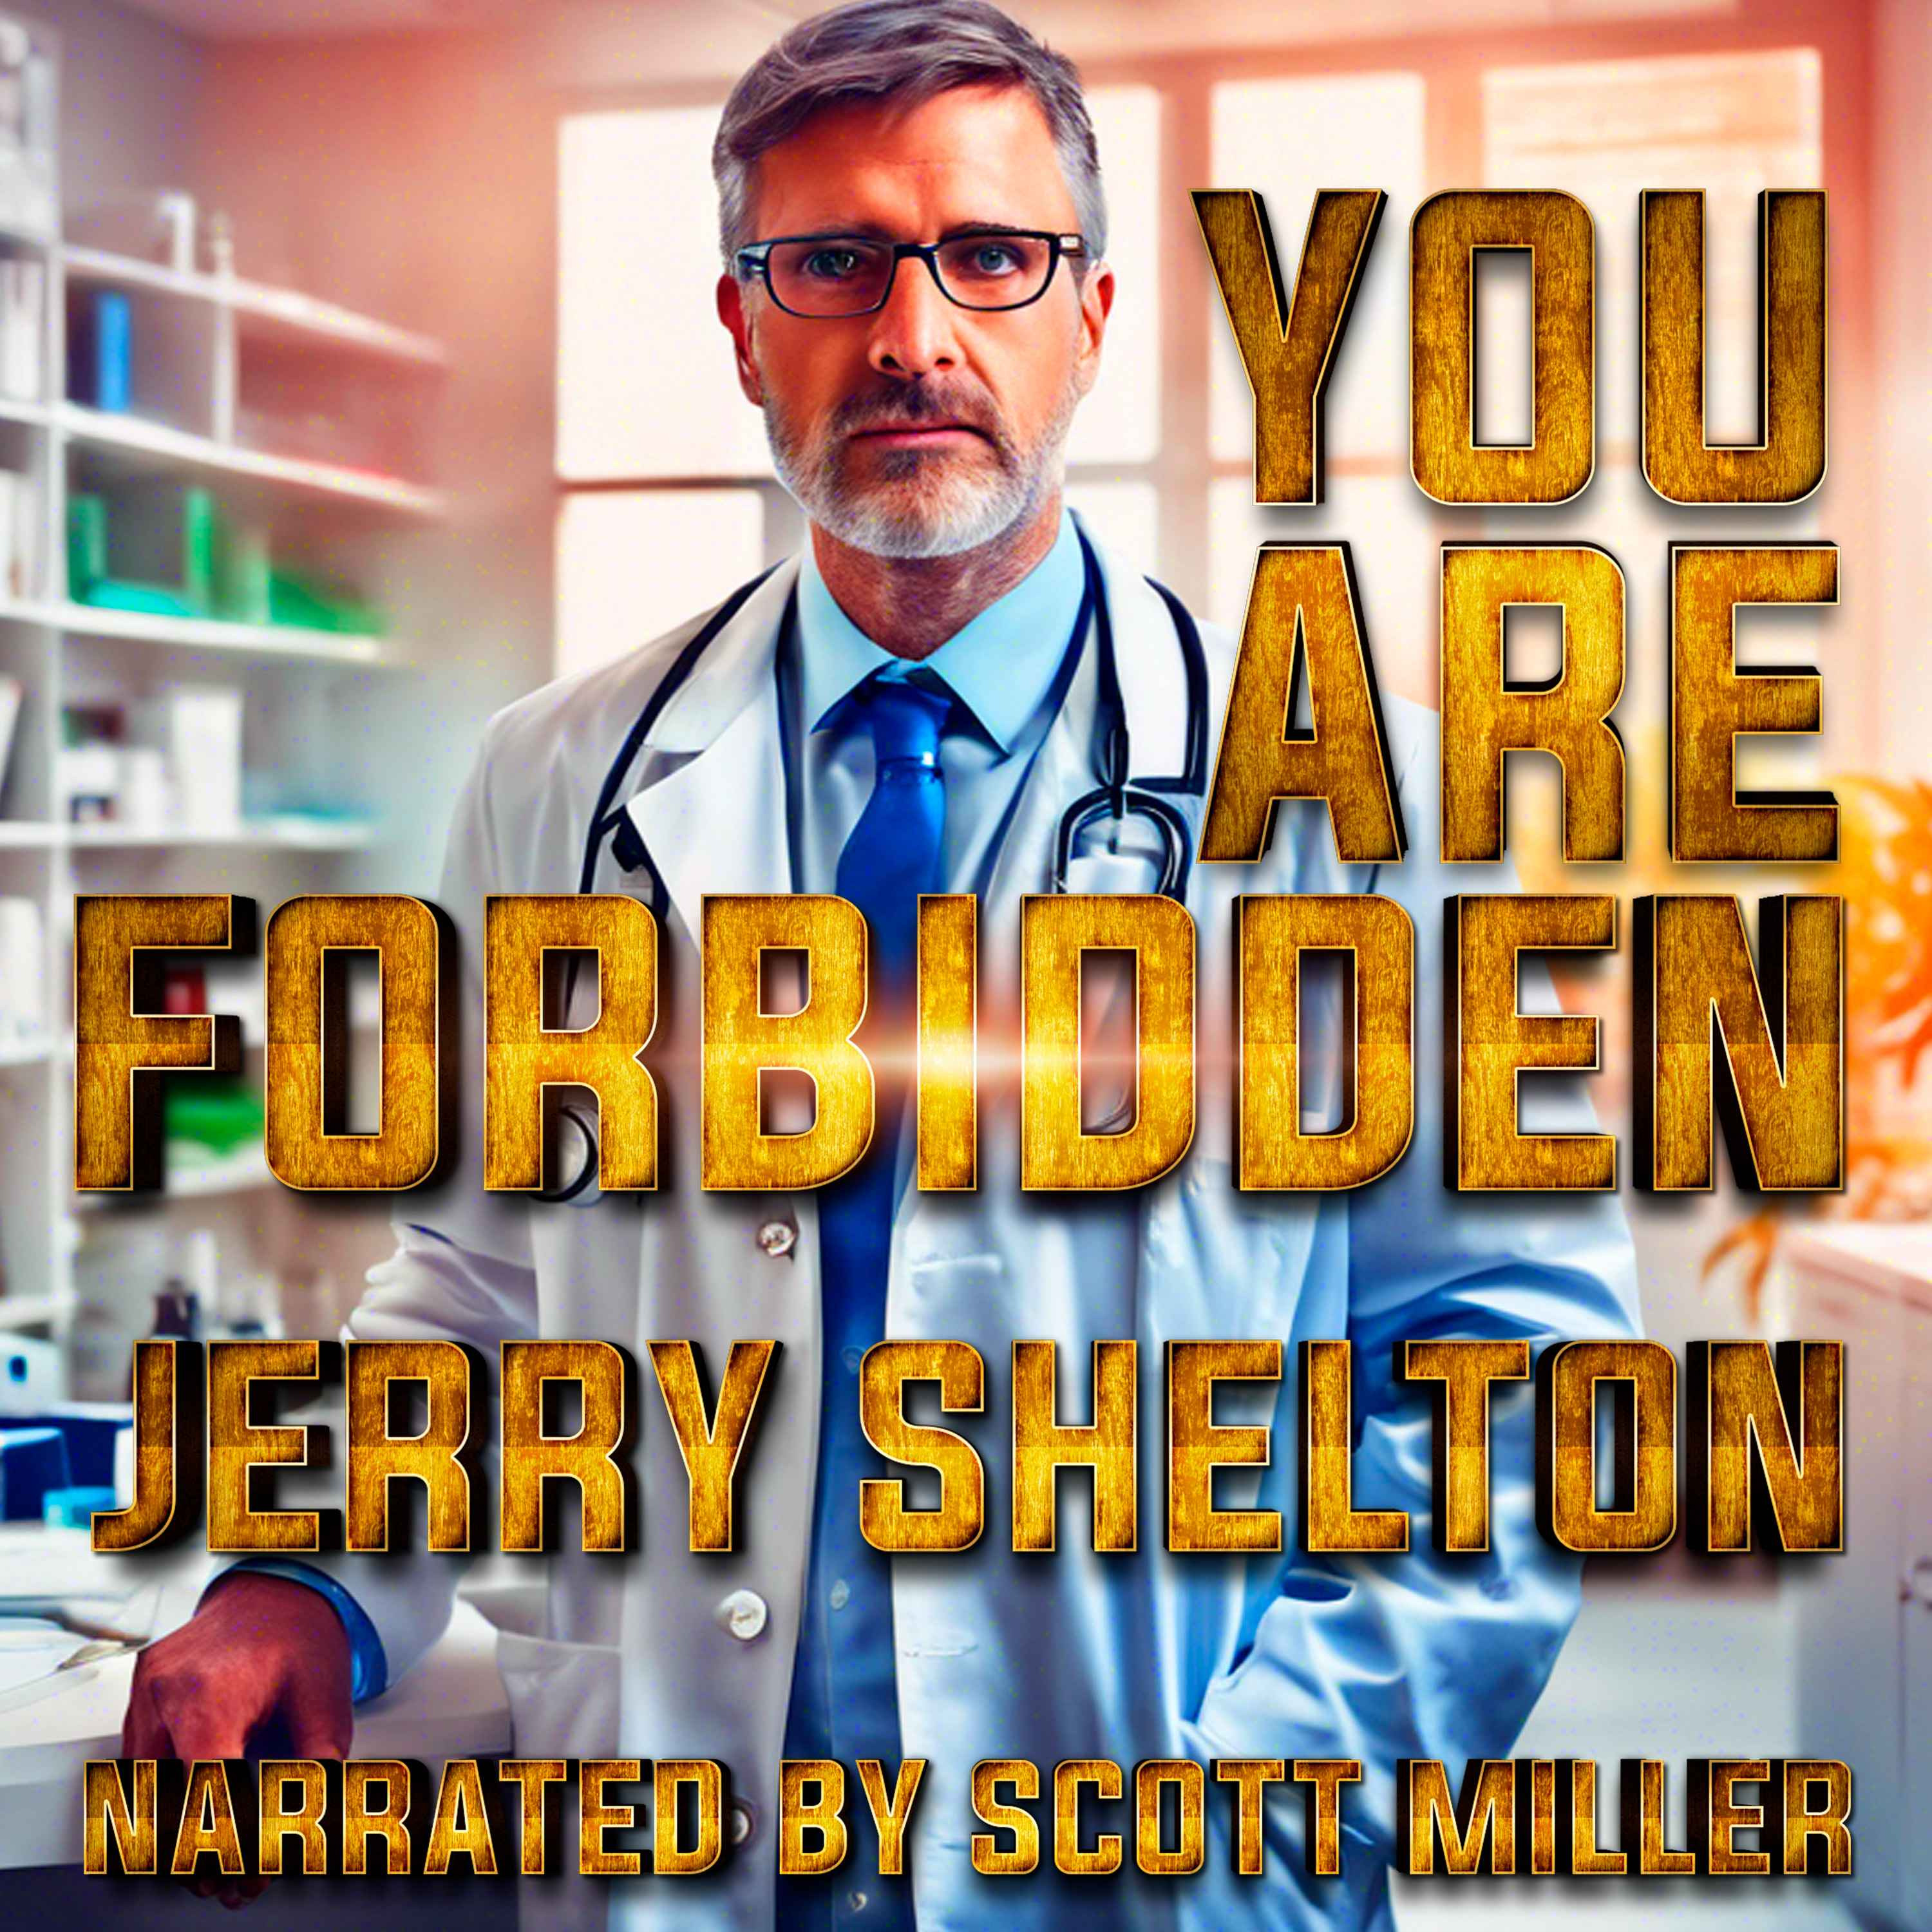 You Are Forbidden by Jerry Shelton - Short Sci Fi Story From the 1940s